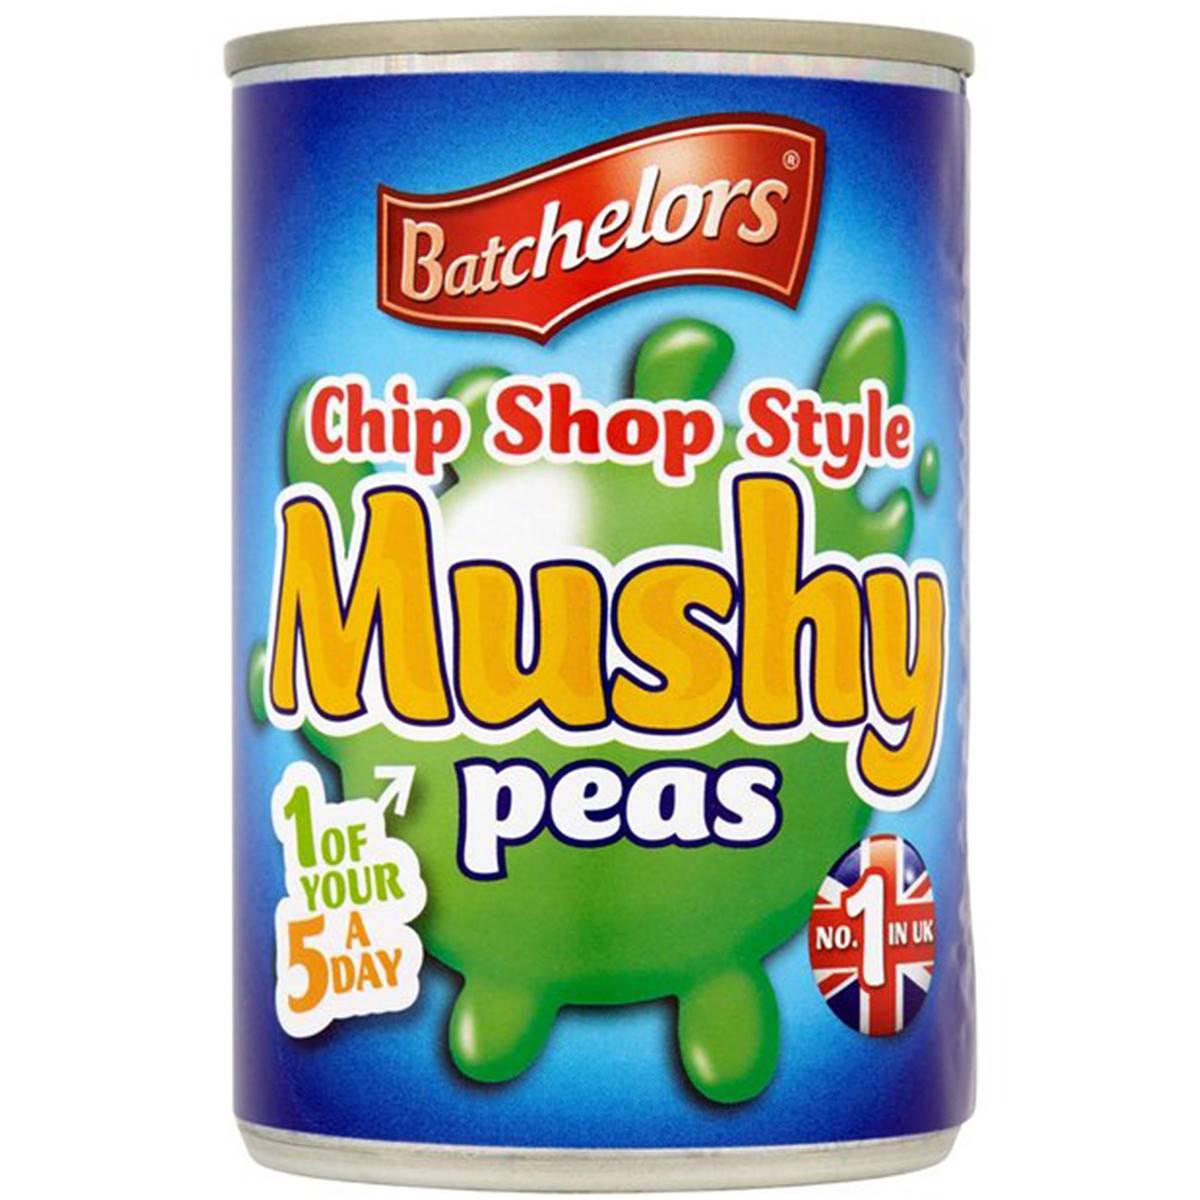 Calories in Batchelors Mushy Peas Canned Chip Shop